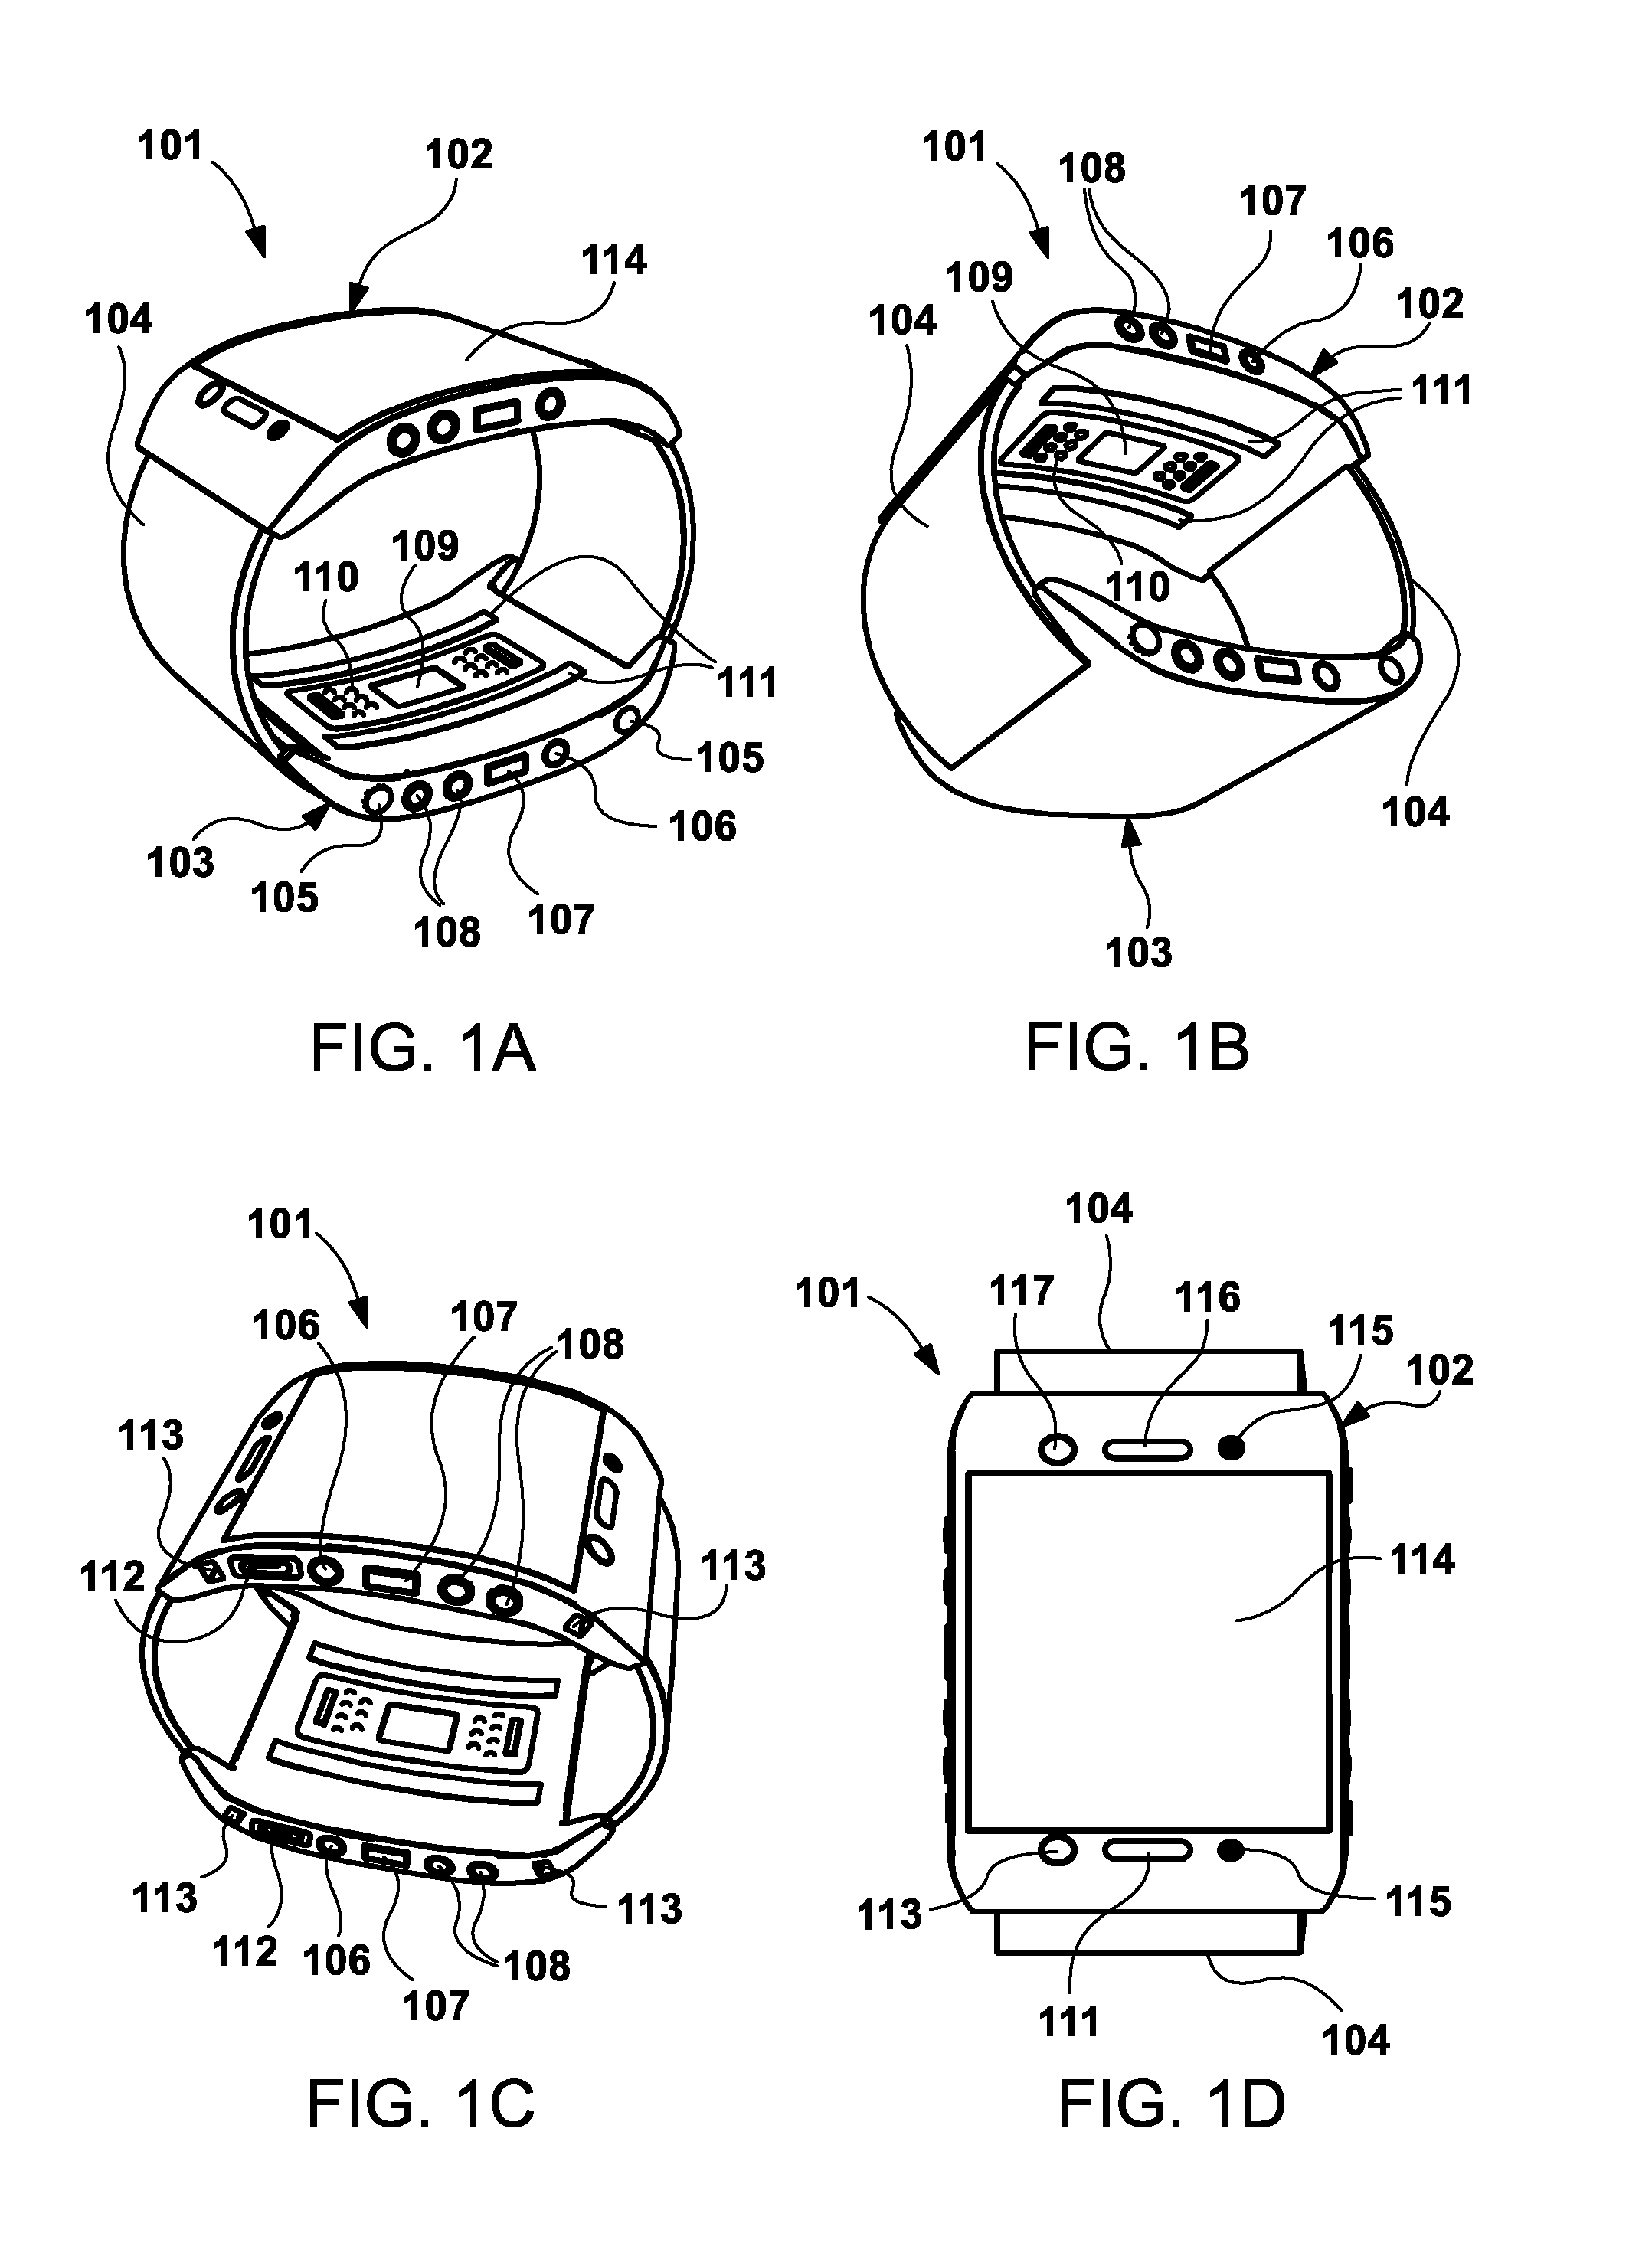 Wireless wrist computing and control device and method for 3D imaging, mapping, networking and interfacing